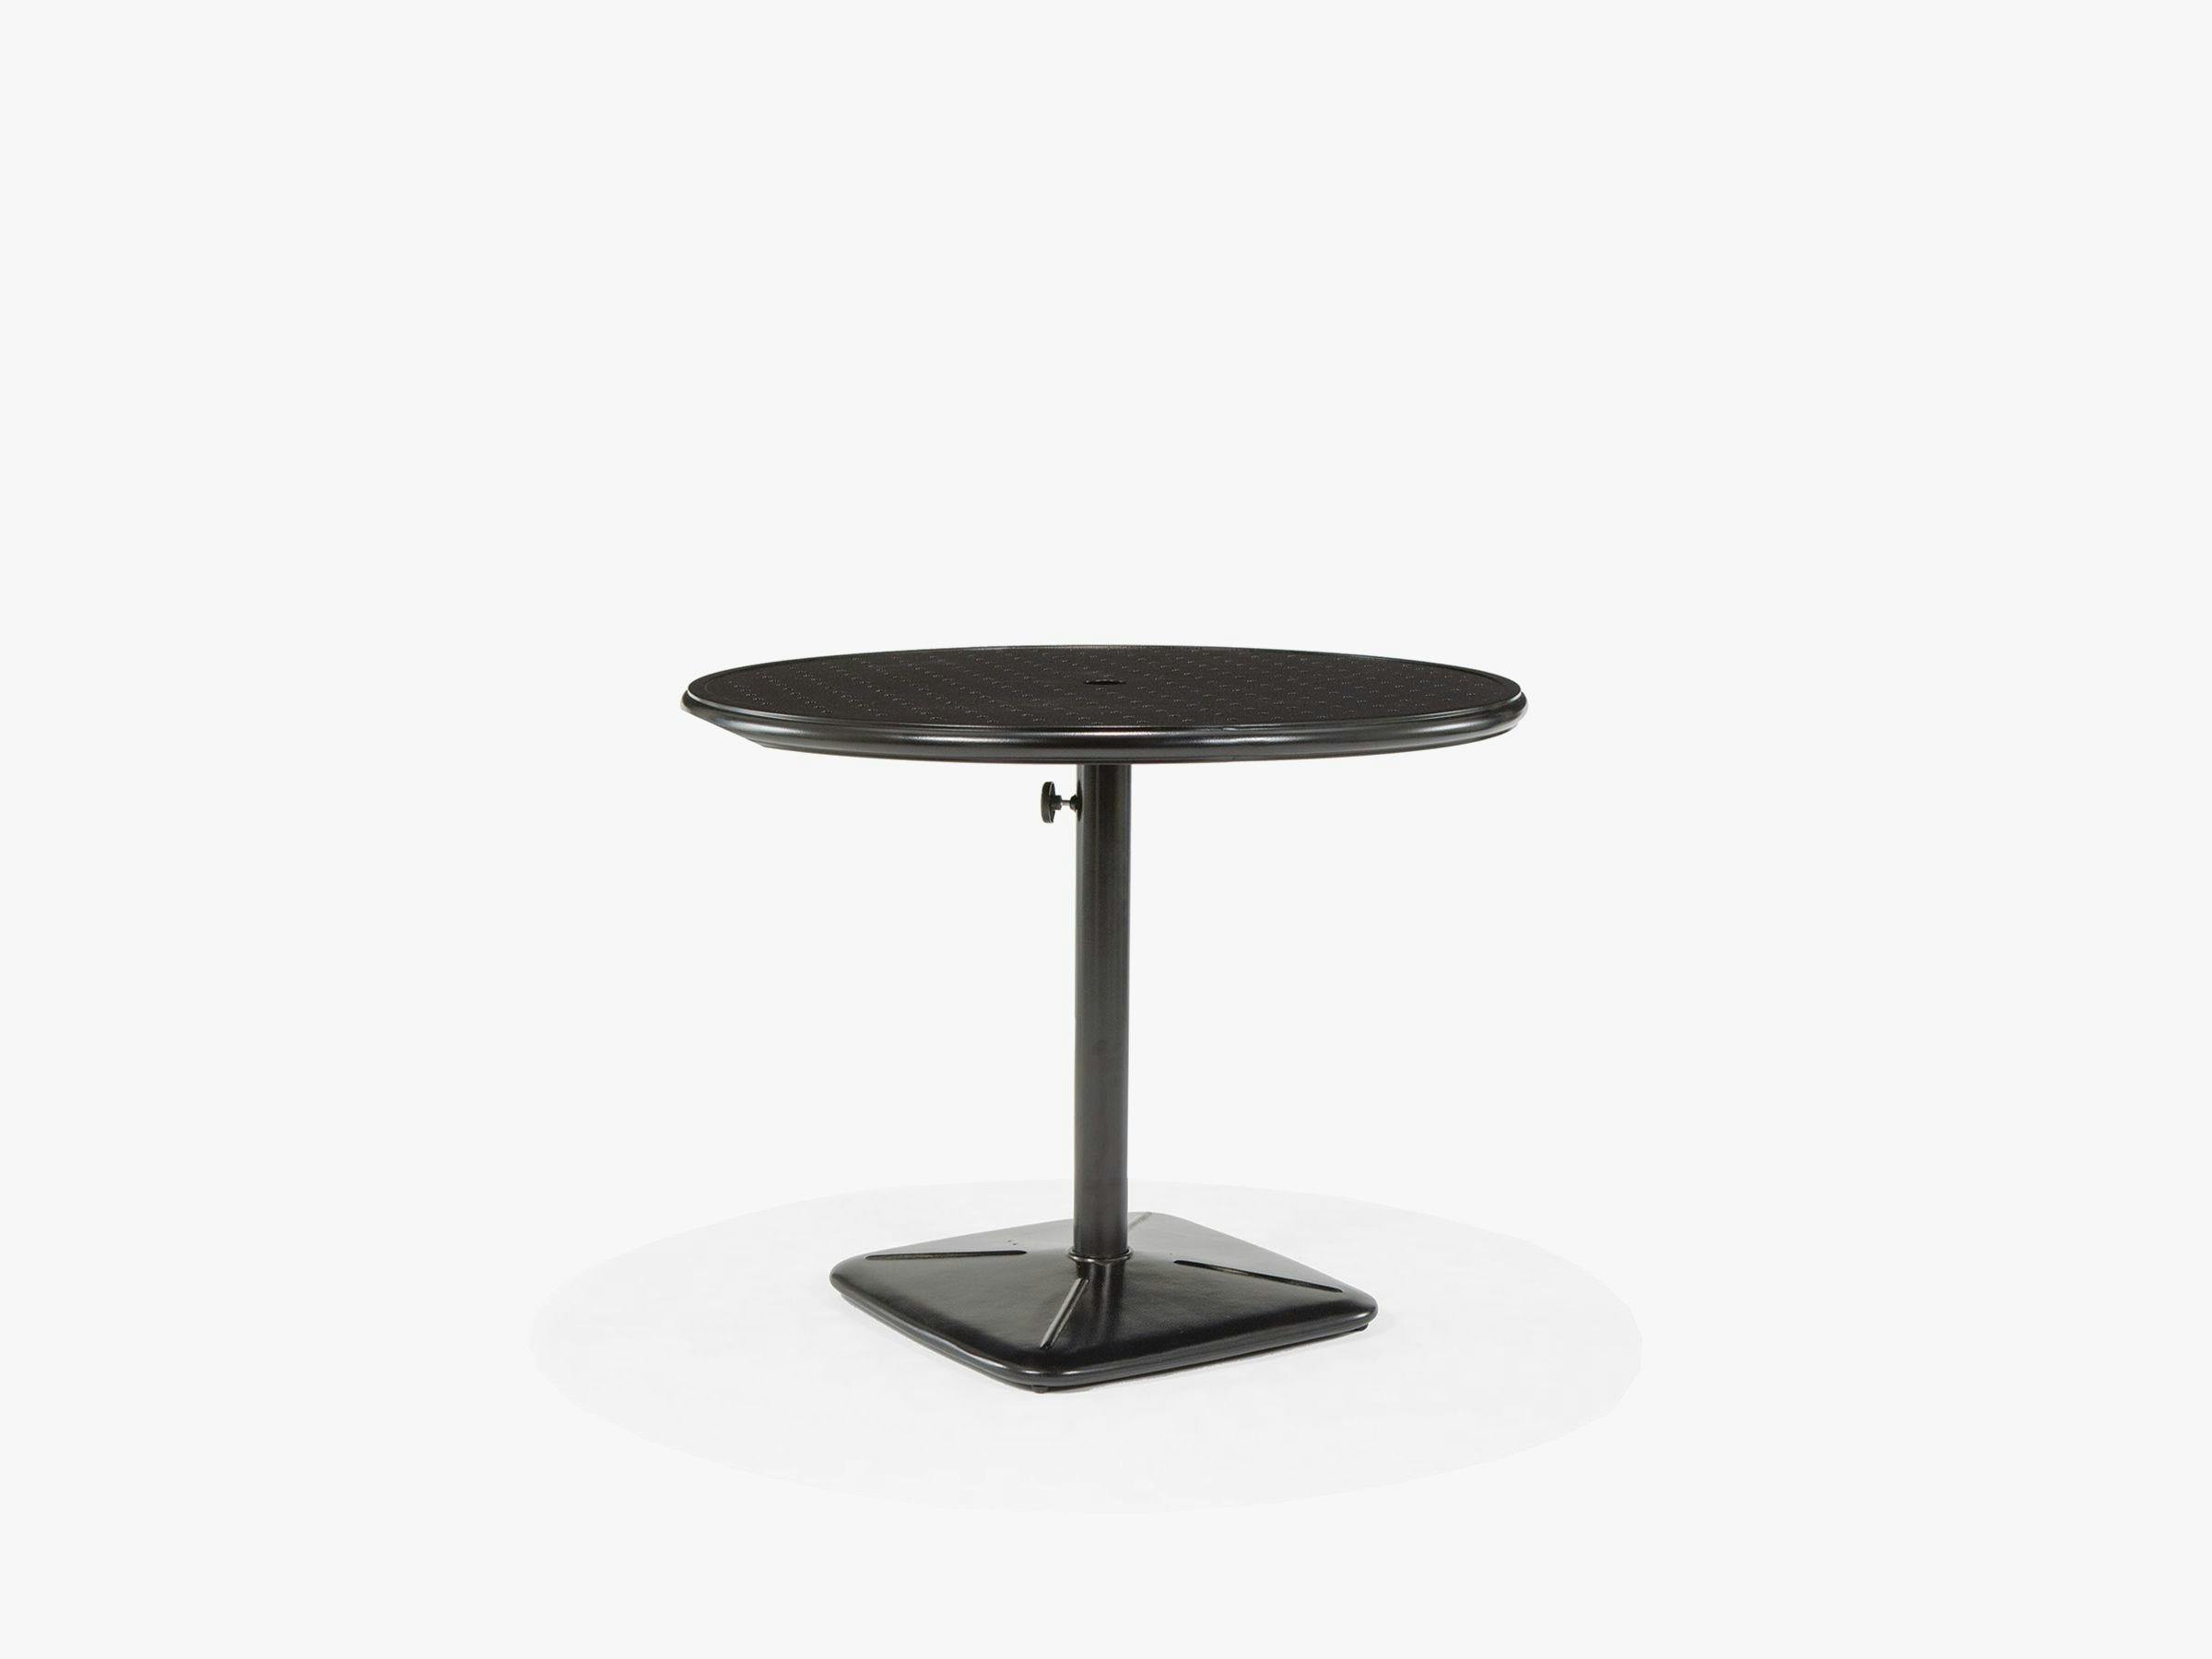 36" Round Dining Cafe Table with Umbrella Hole and Cast Plug